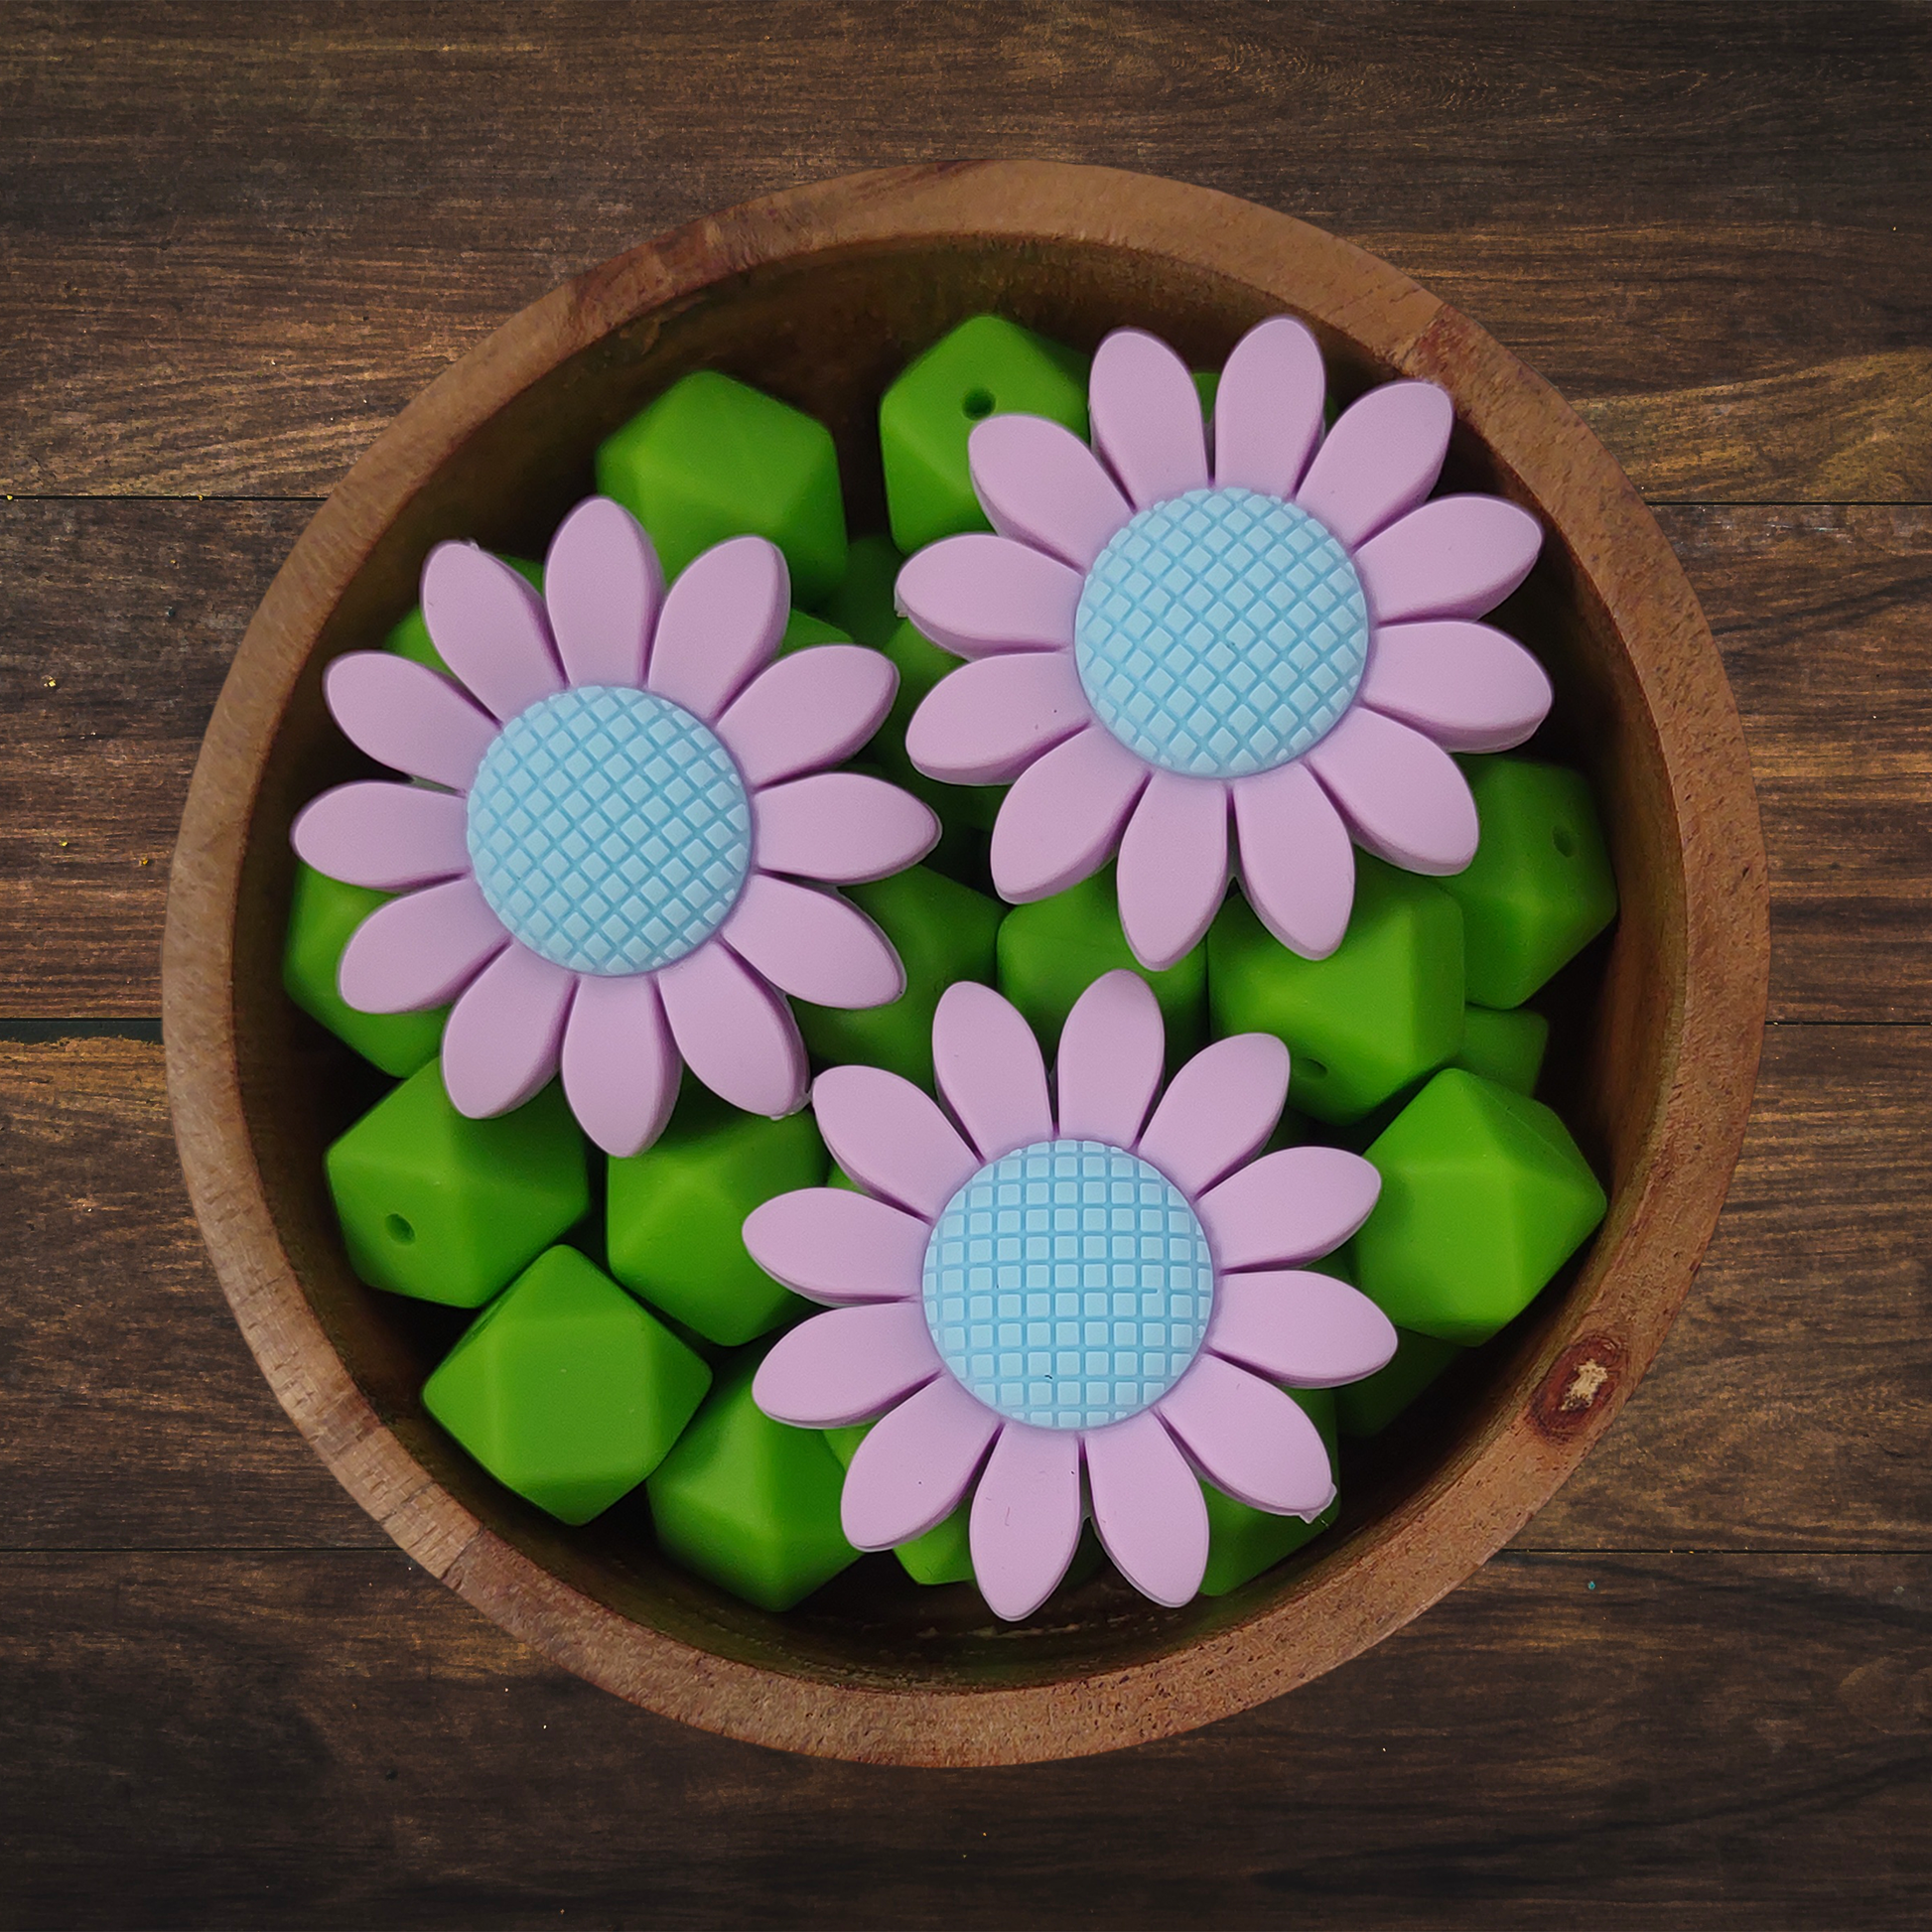 Silicone Focal Beads for Pens, 20mm Sunflower Silicone Beads, 10pcs Daisy Silicone Focal Beads, Silicone Shaped Beads for Keychain Making, Sunflower